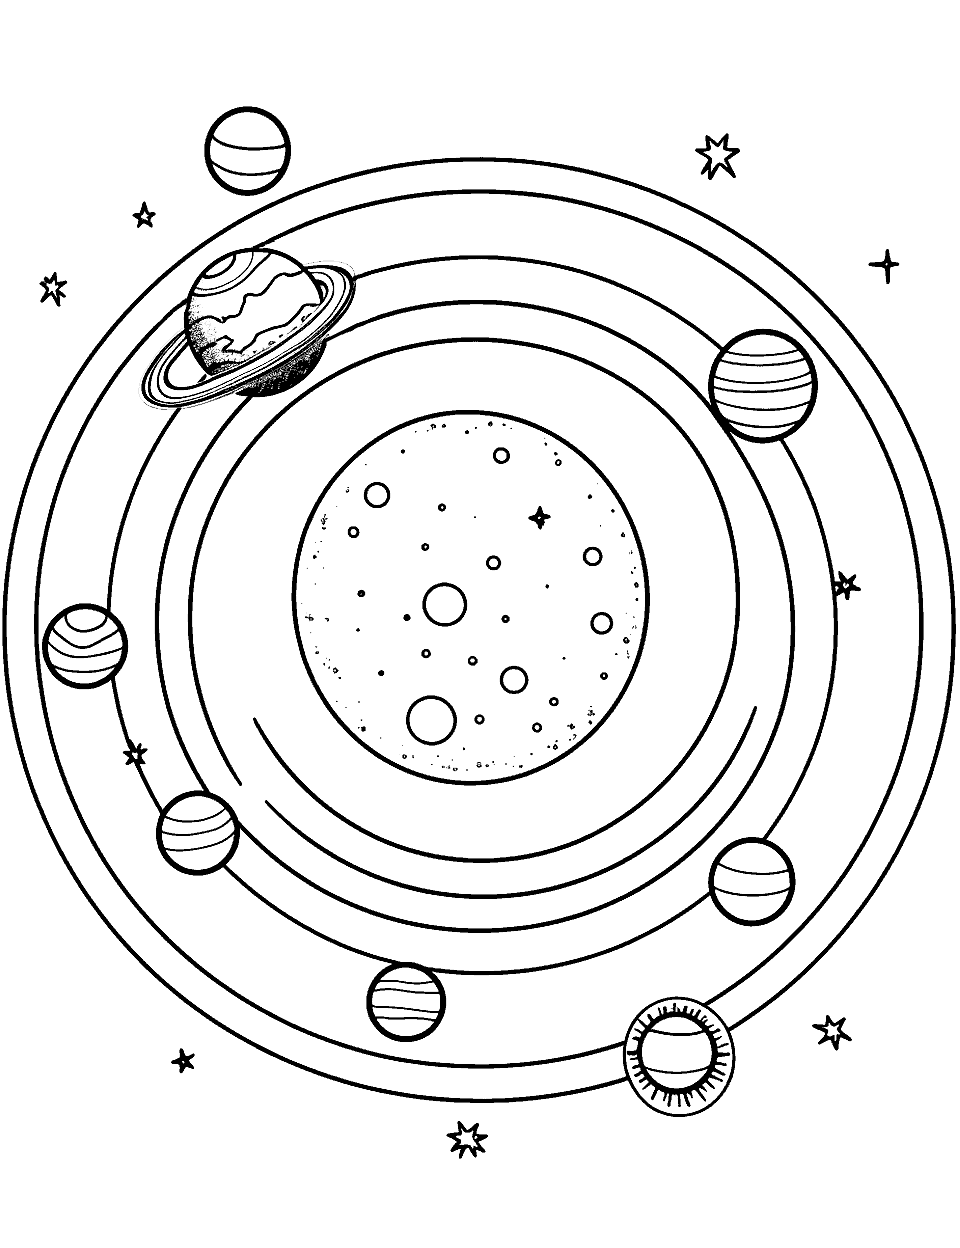 Simple Planets Solar System Coloring Page - A simple picture of planets, including Earth orbiting around the sun.